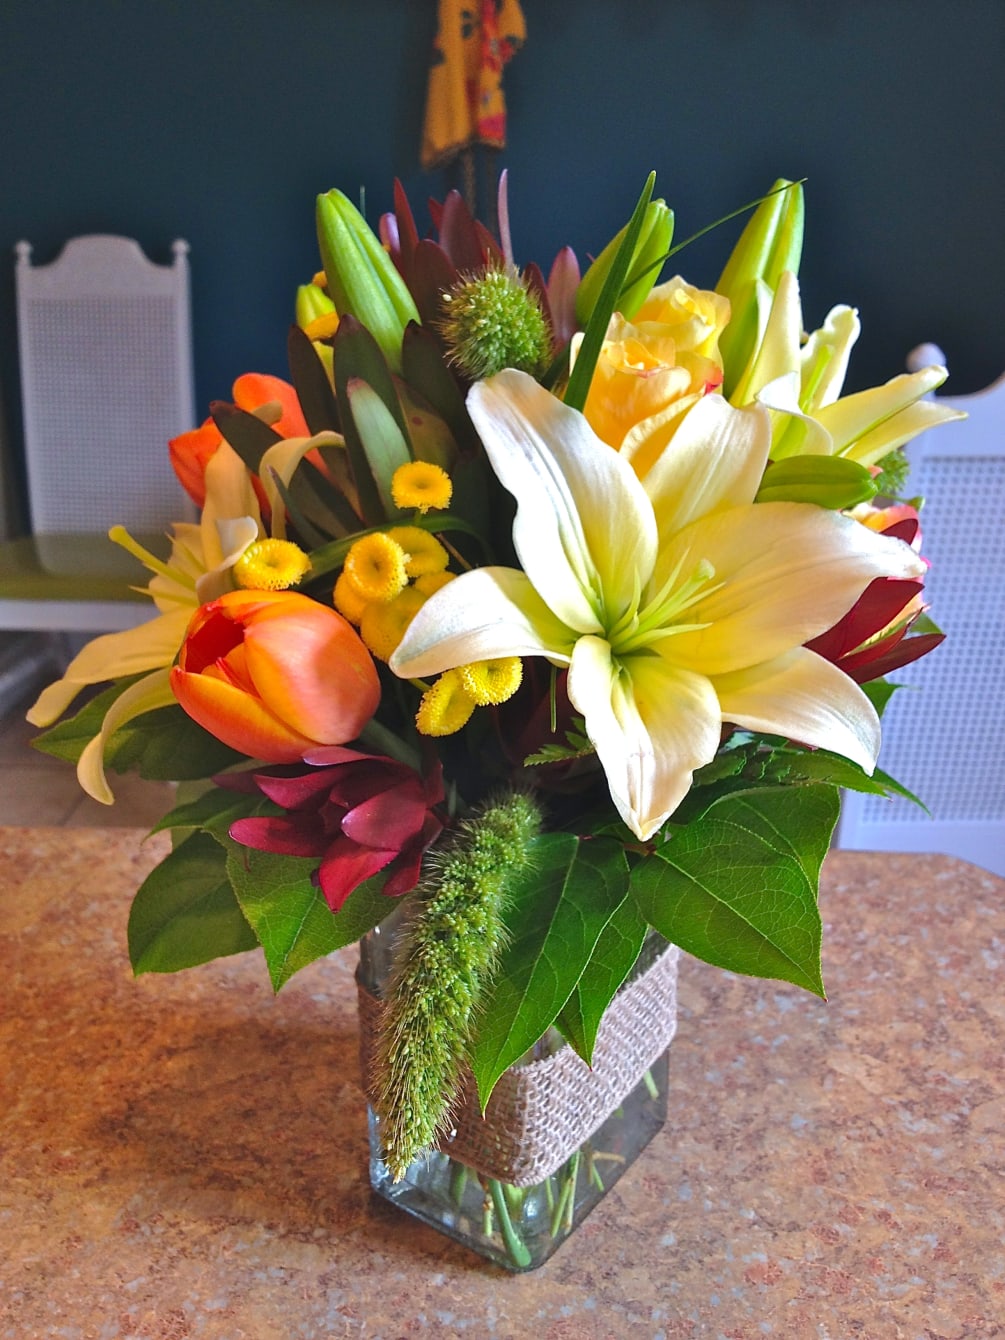 A low rectangular vase holds this monochromatic mix of blooms...yellows, creams, oranges